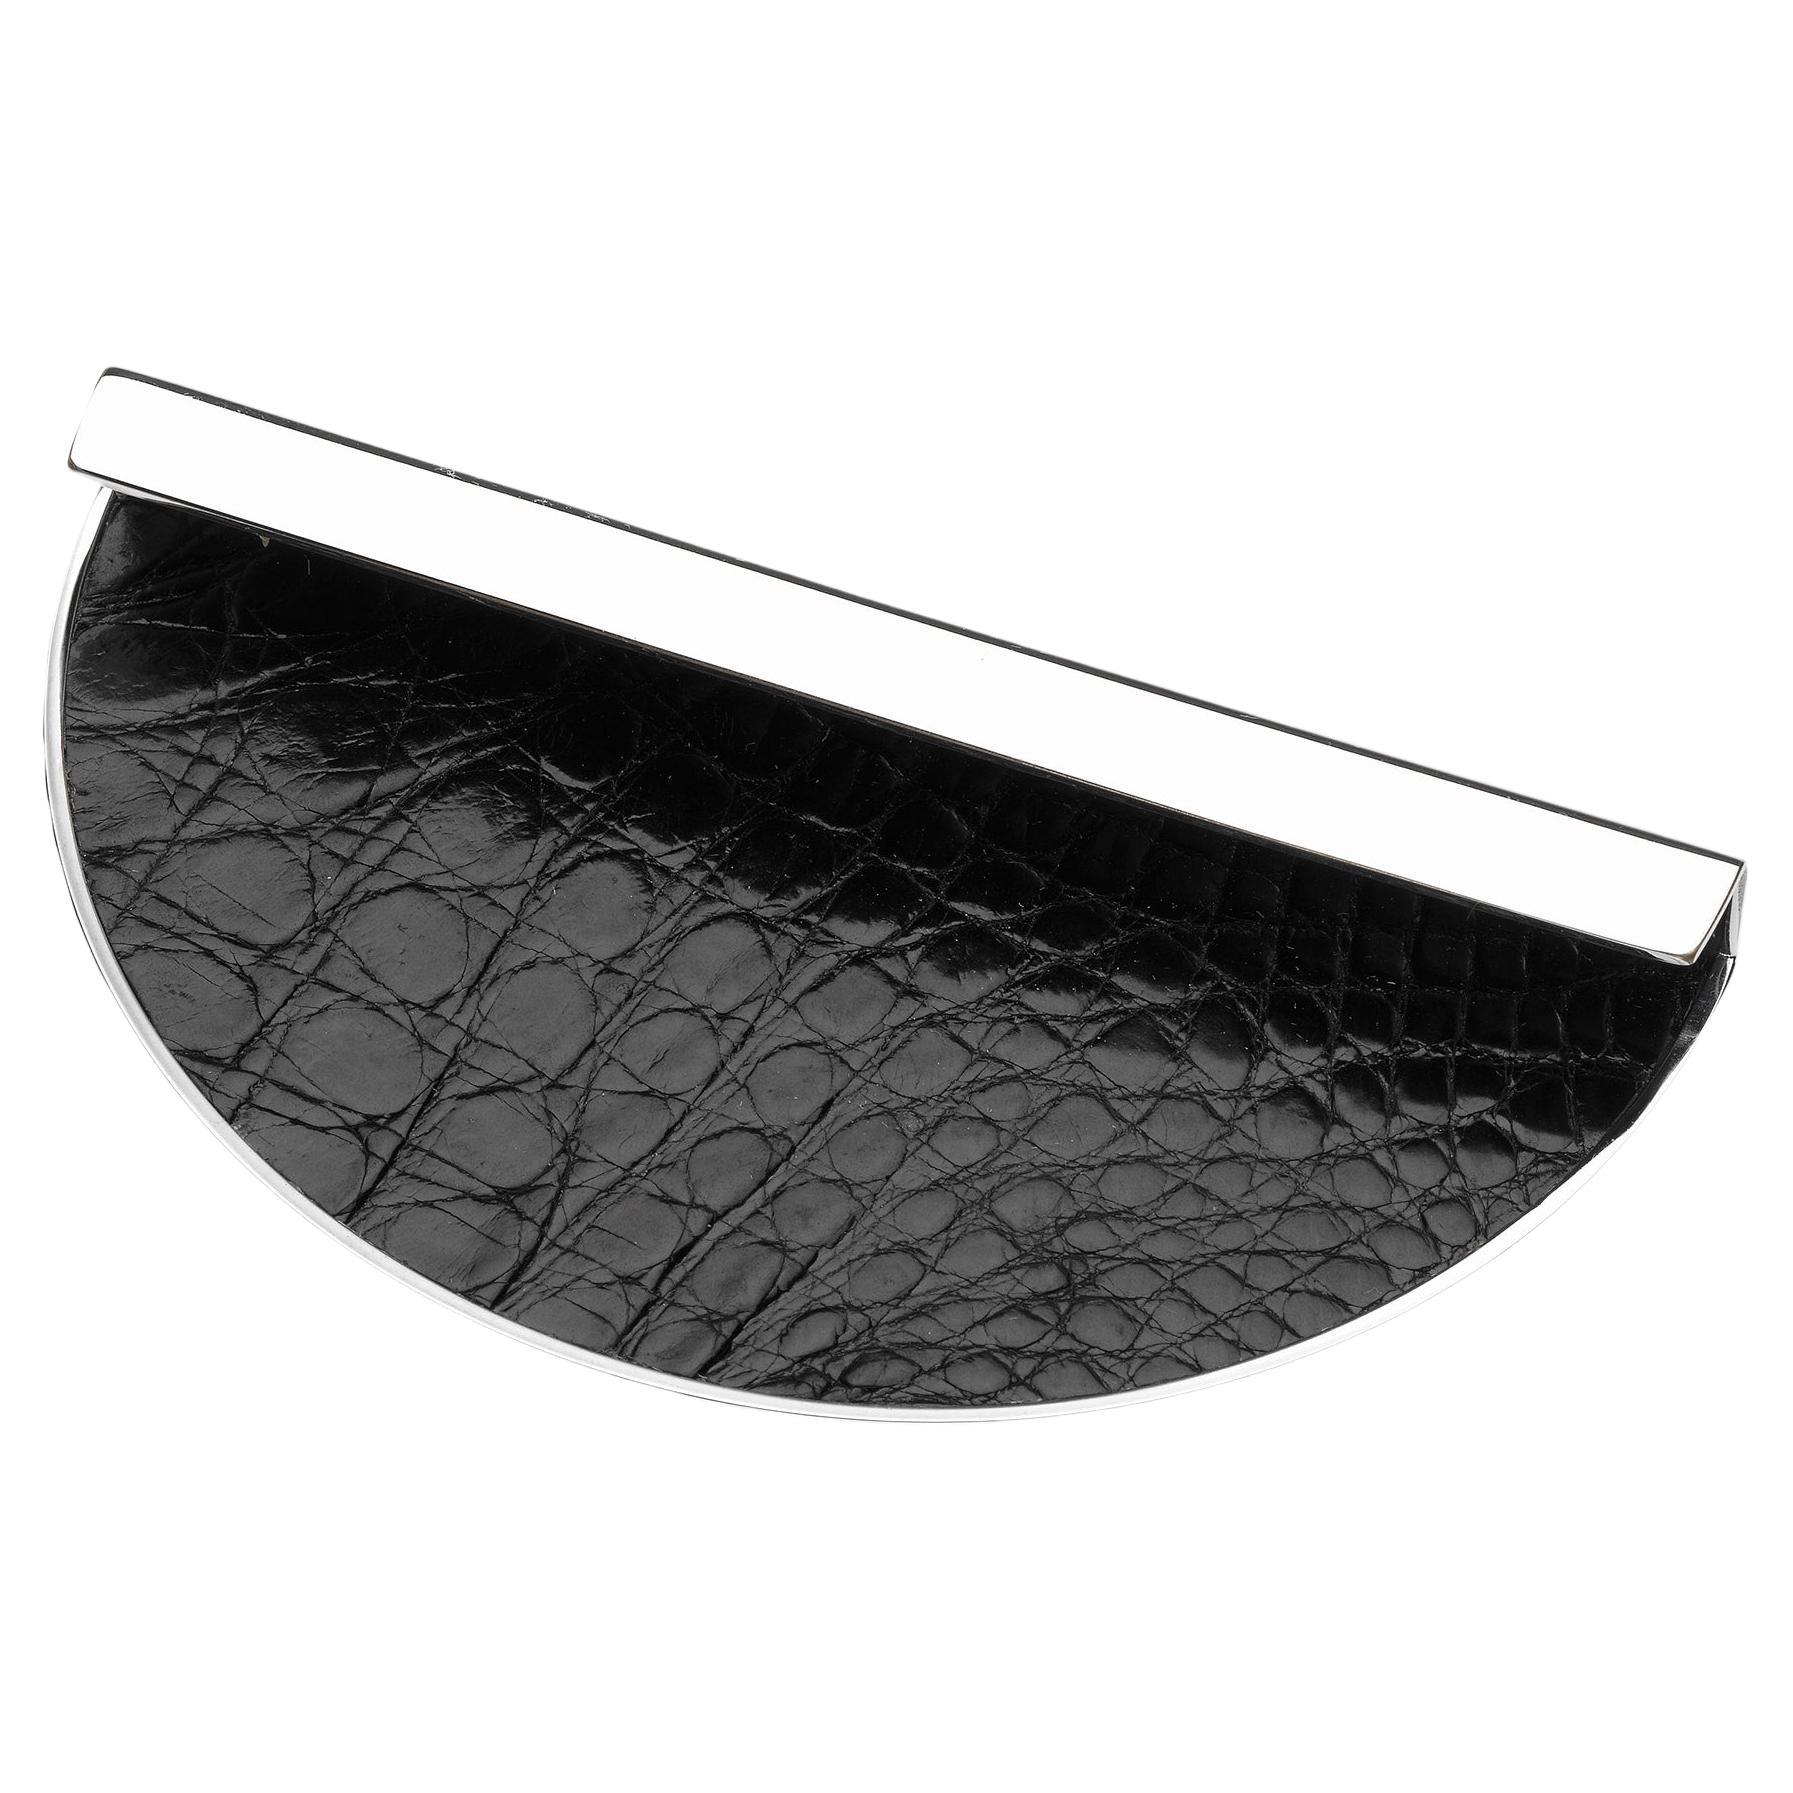 Luxury Pull Handle, Various Metal & Leather Color Finishes Half Moon Shape Large